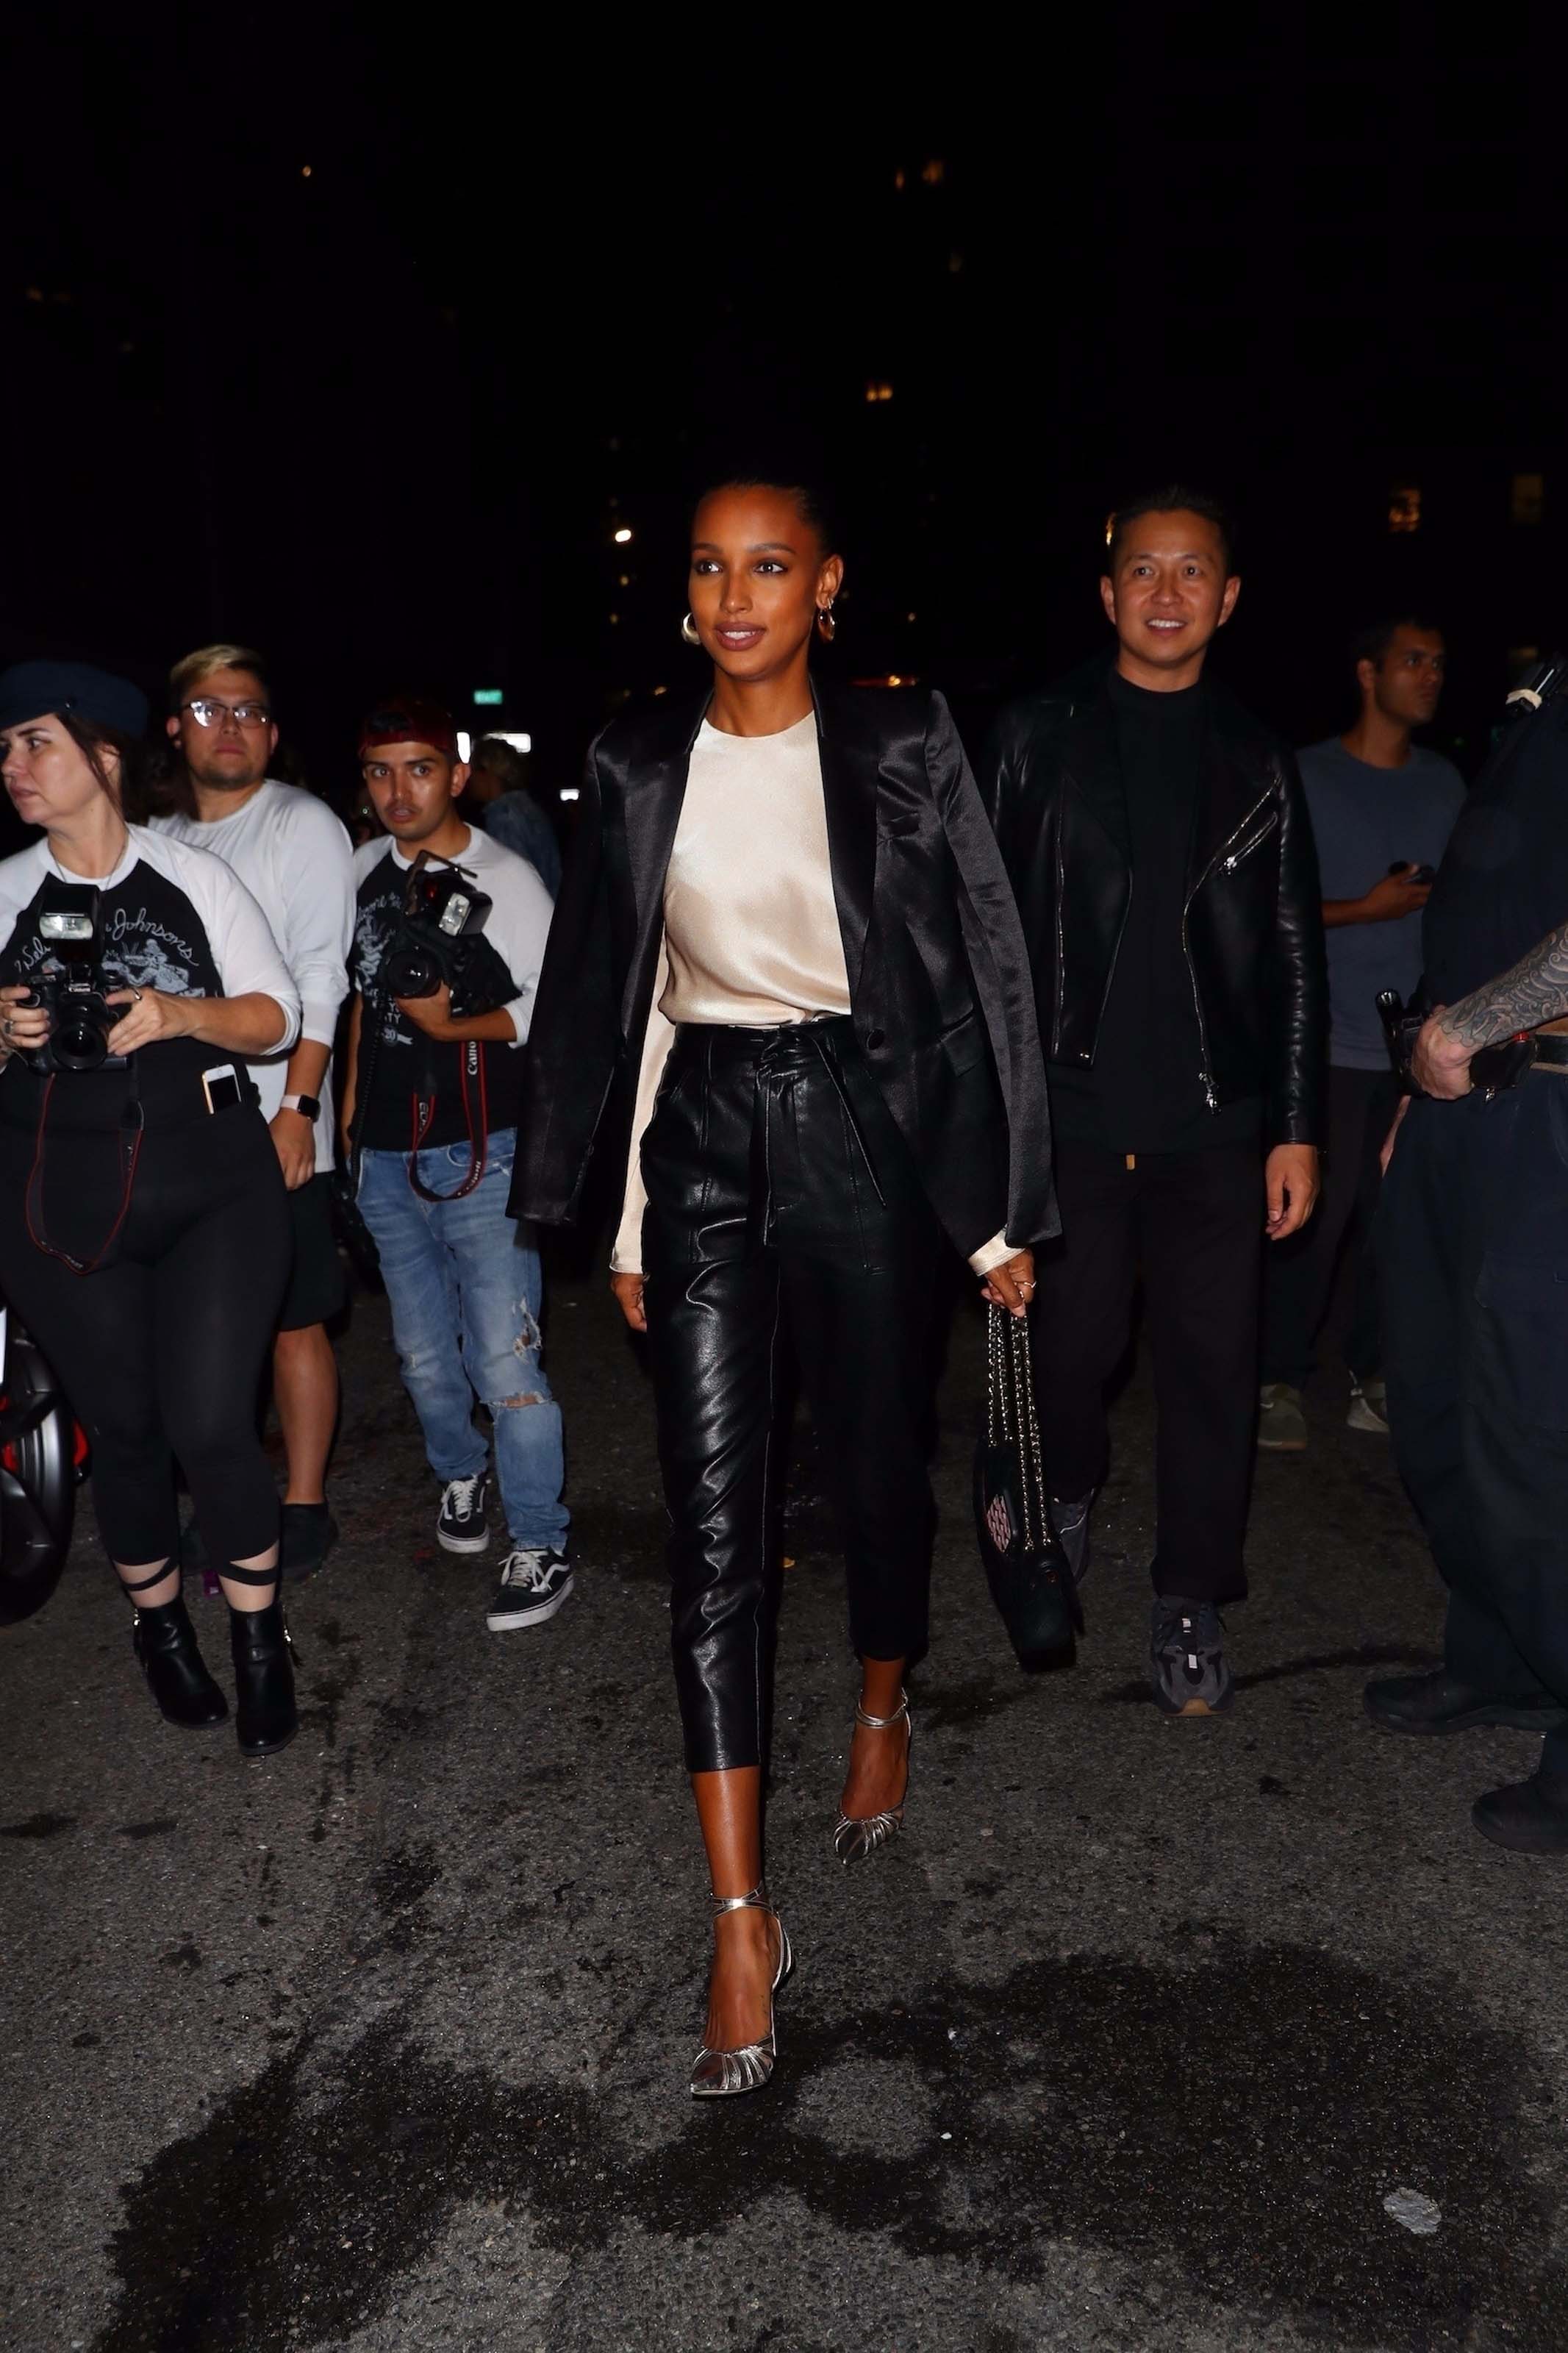 Jasmine Tookes attends Rihanna’s afterparty